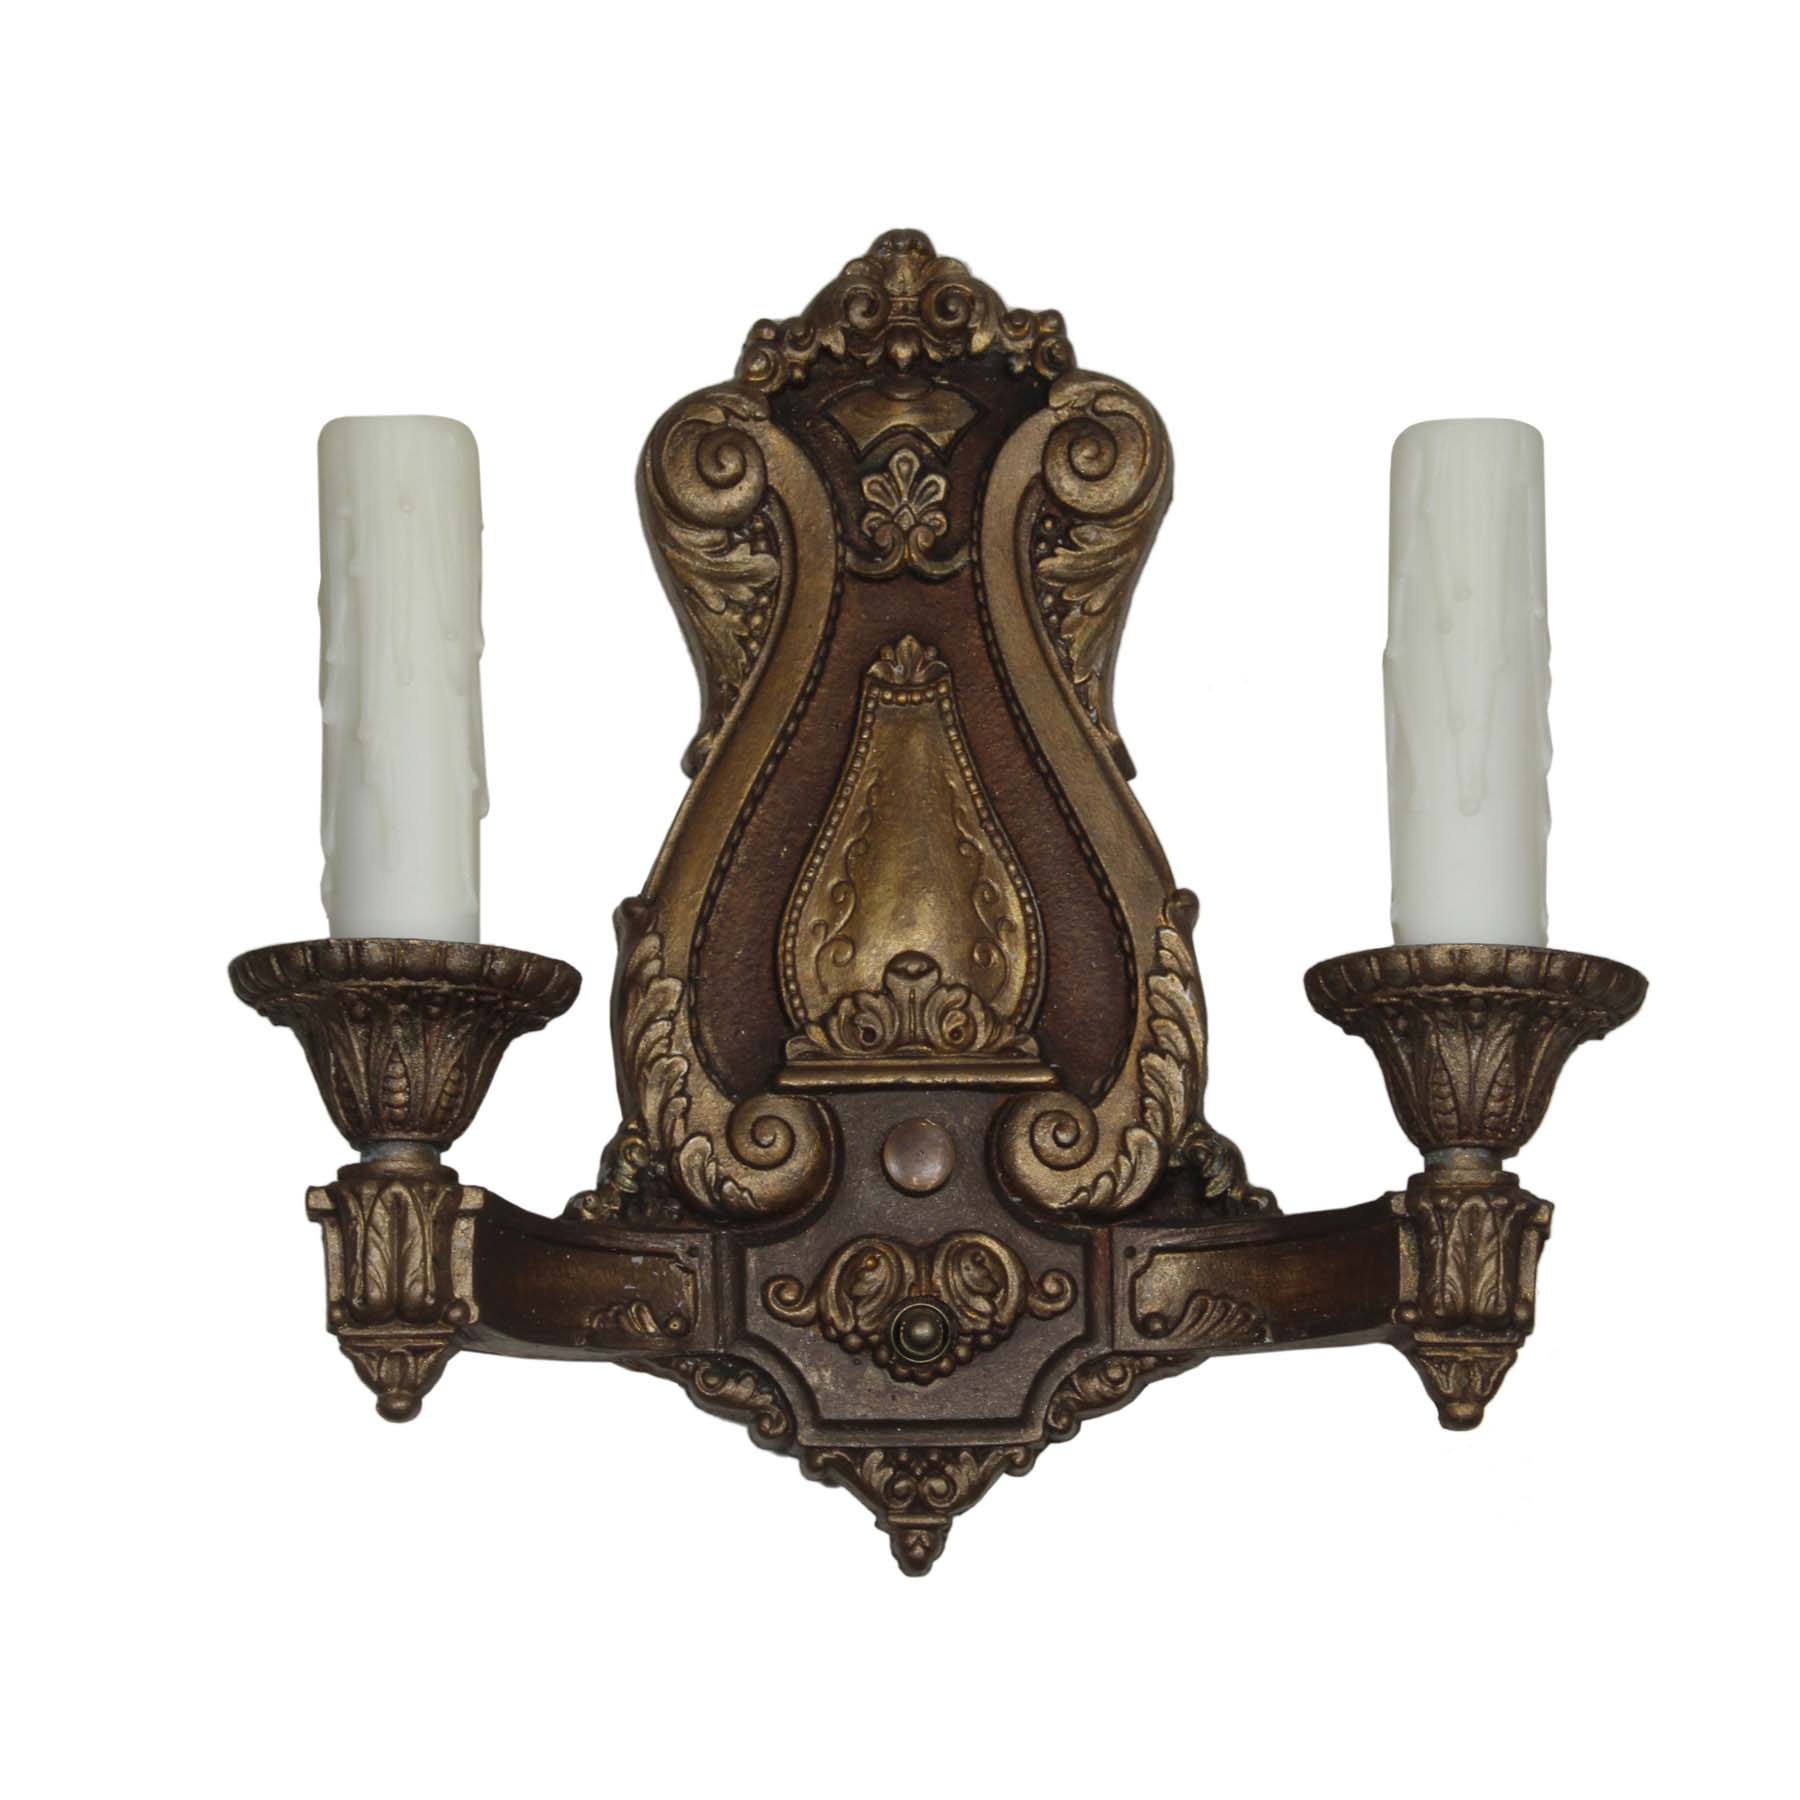 SOLD Pair of Antique Neoclassical Double-Arm Sconces-70435